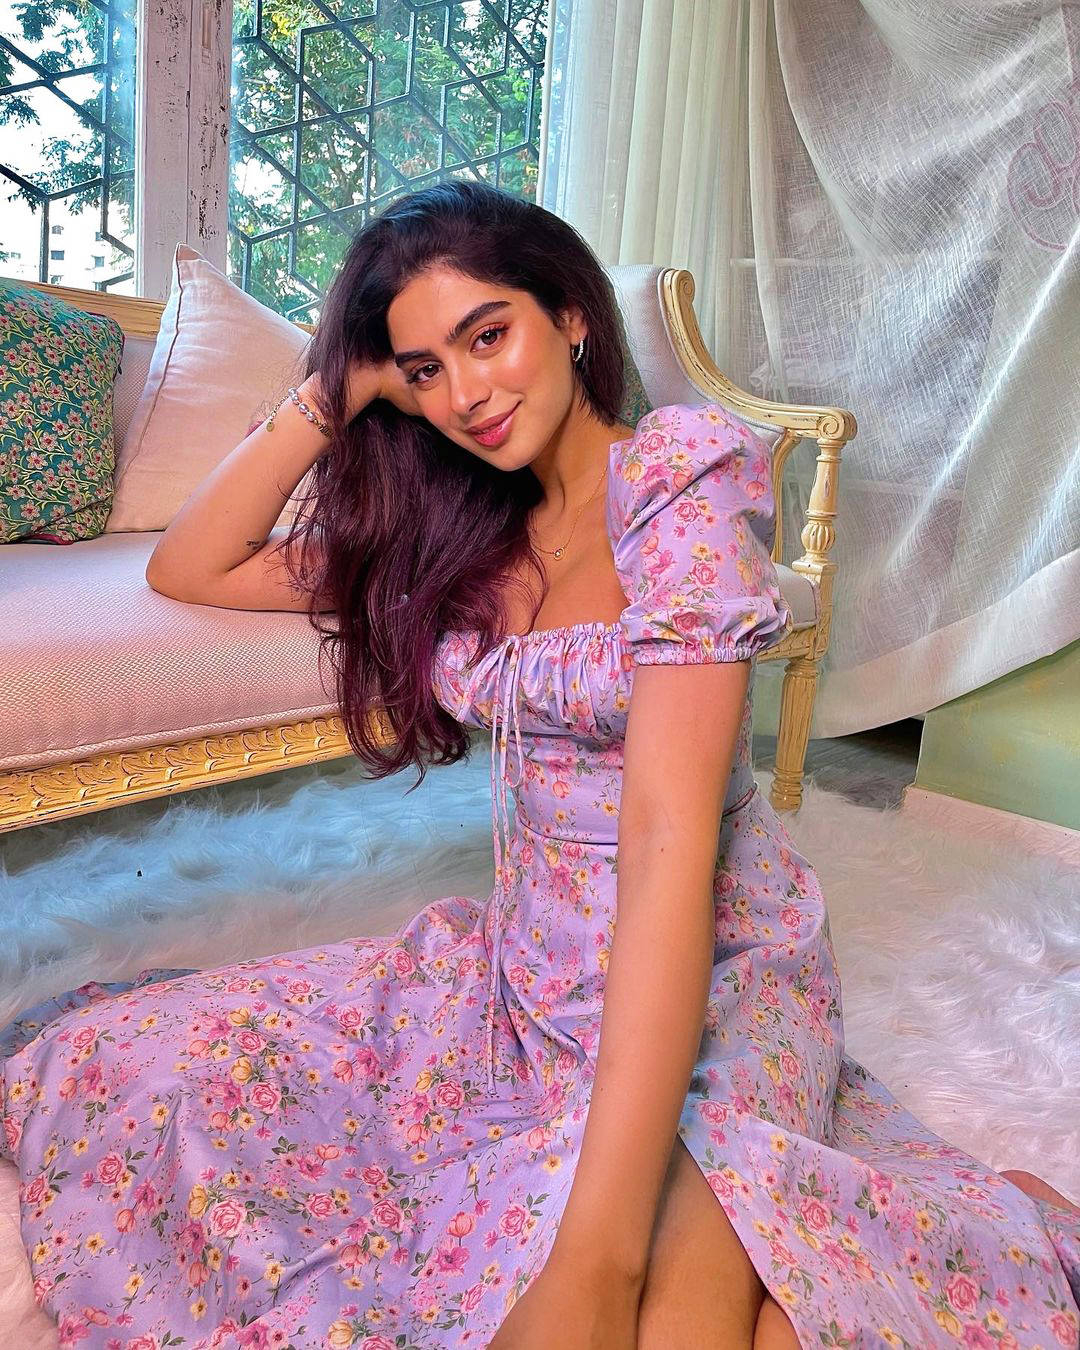 Khushi Kapoor’s captivating pictures in these trendy outfits are surely worth a thousand words!